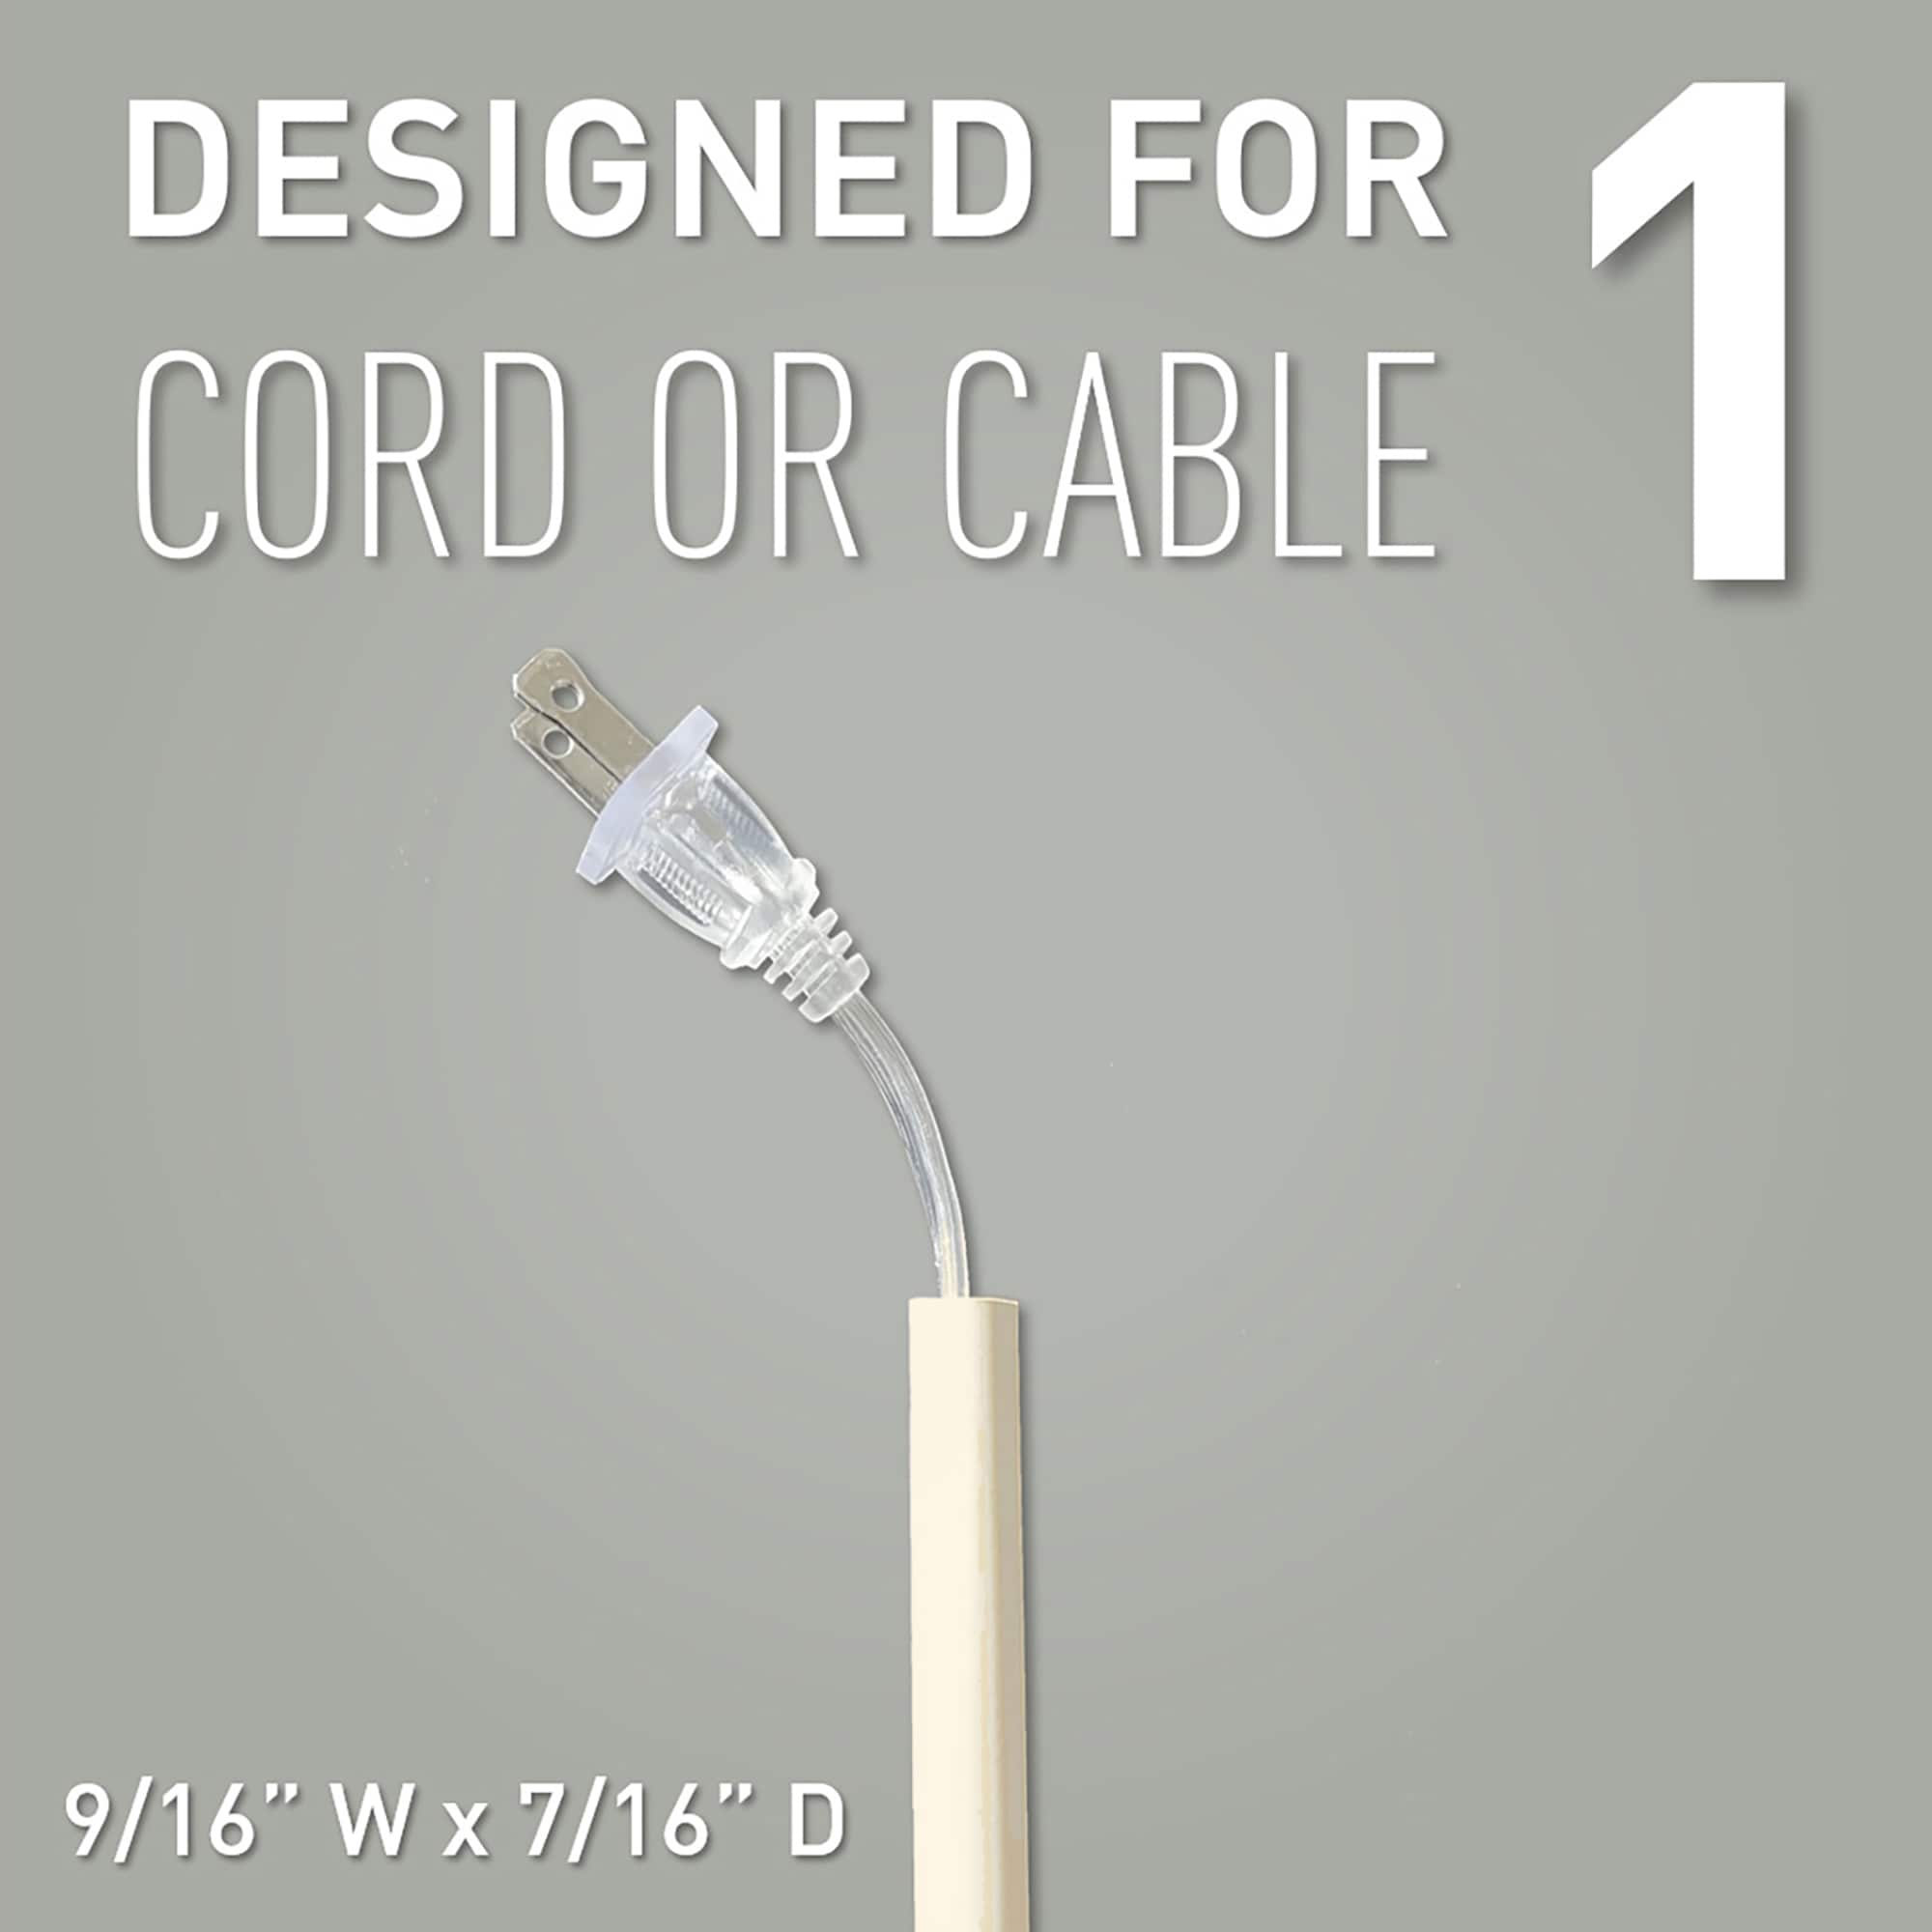 Legrand CordMate 5-ft x 0.56-in PVC White Straight Channel Cord Cover in  the Cord Covers & Organizers department at